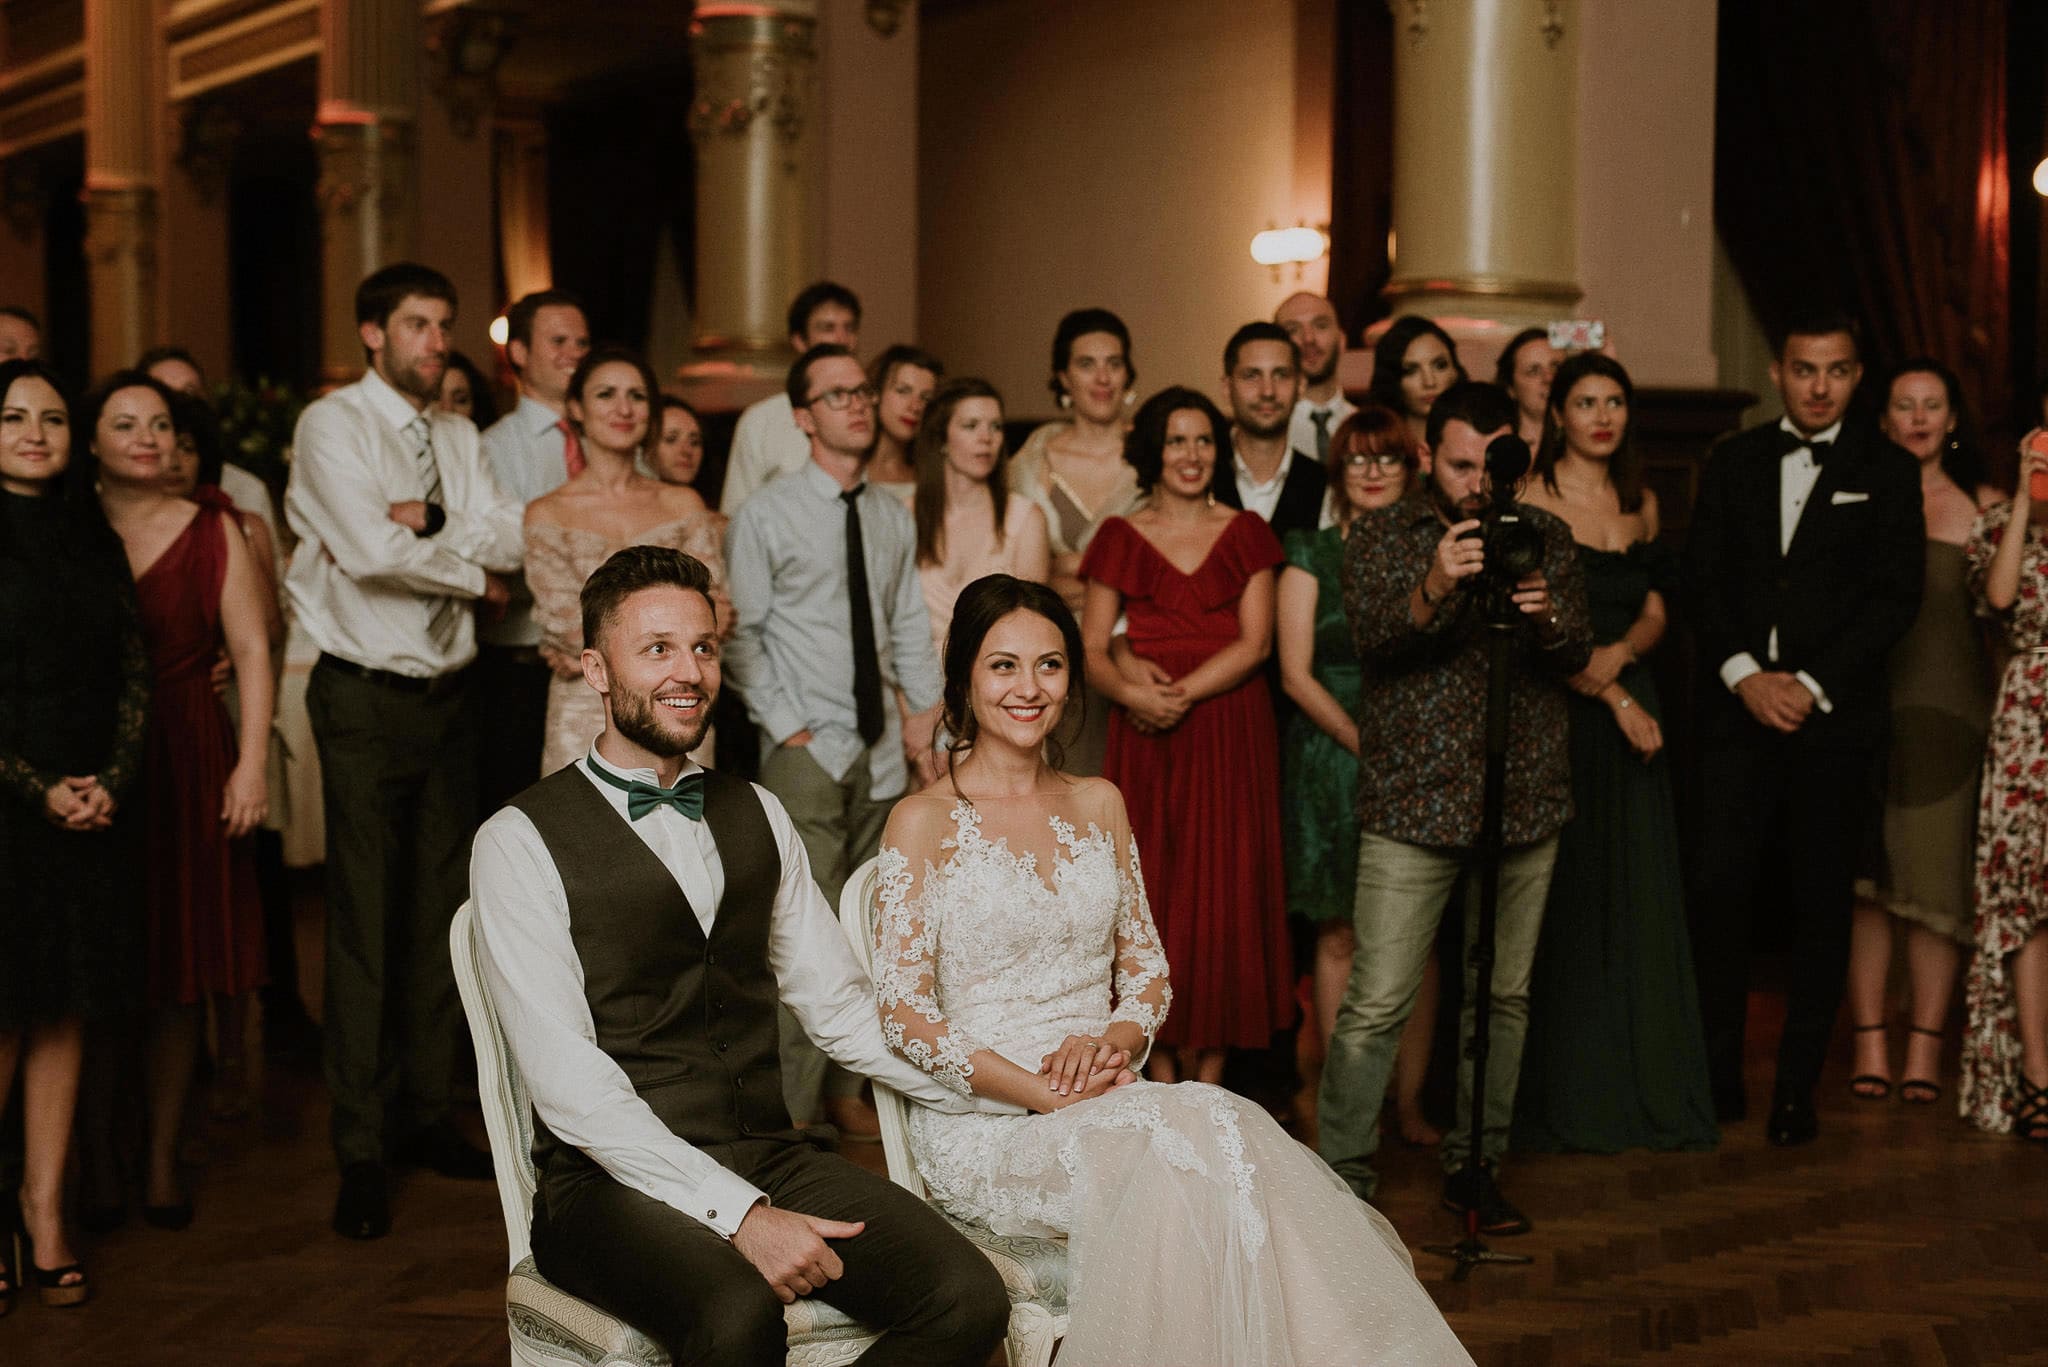 the wedding couple and their guests watch a video during a fun game